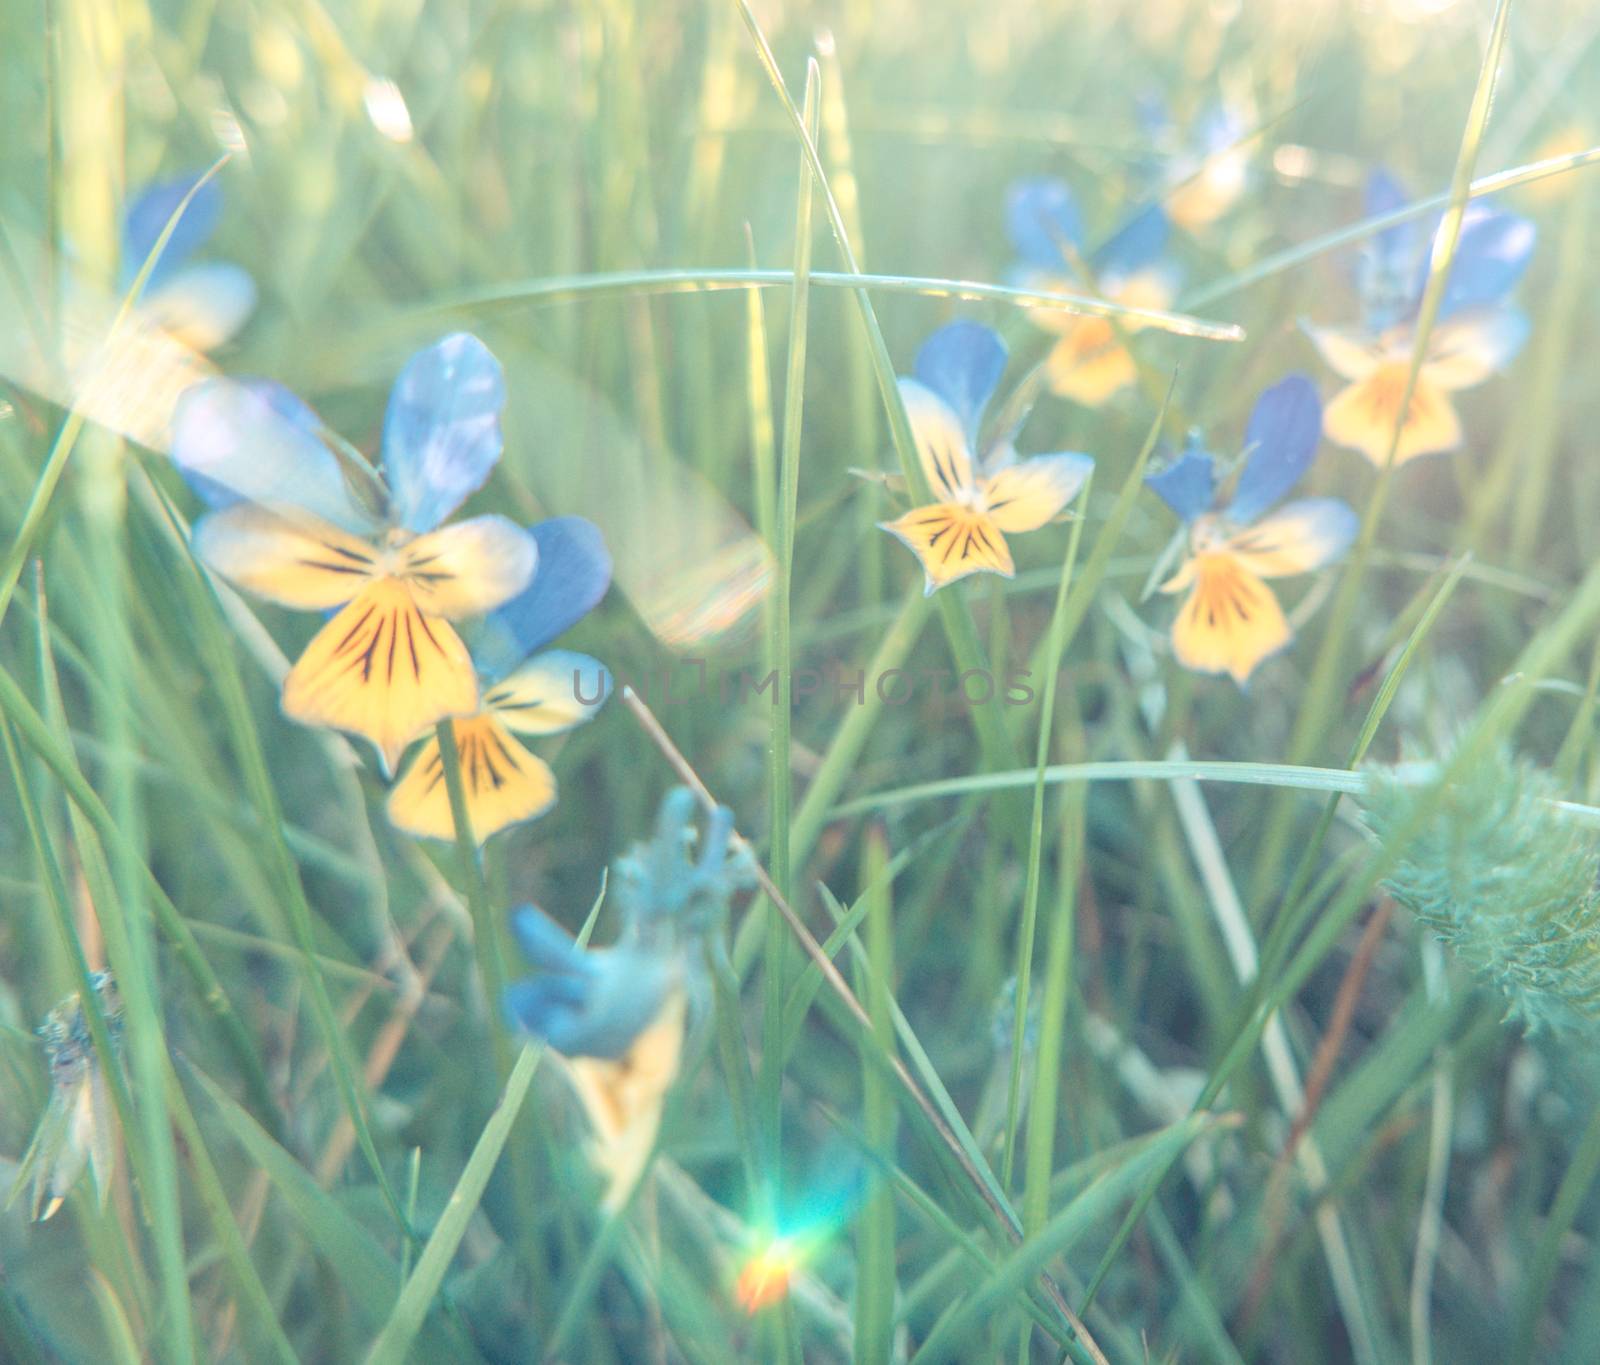 Pastel Filtered Soft Focus Image Of Summer Wild Flowers In Long Grass